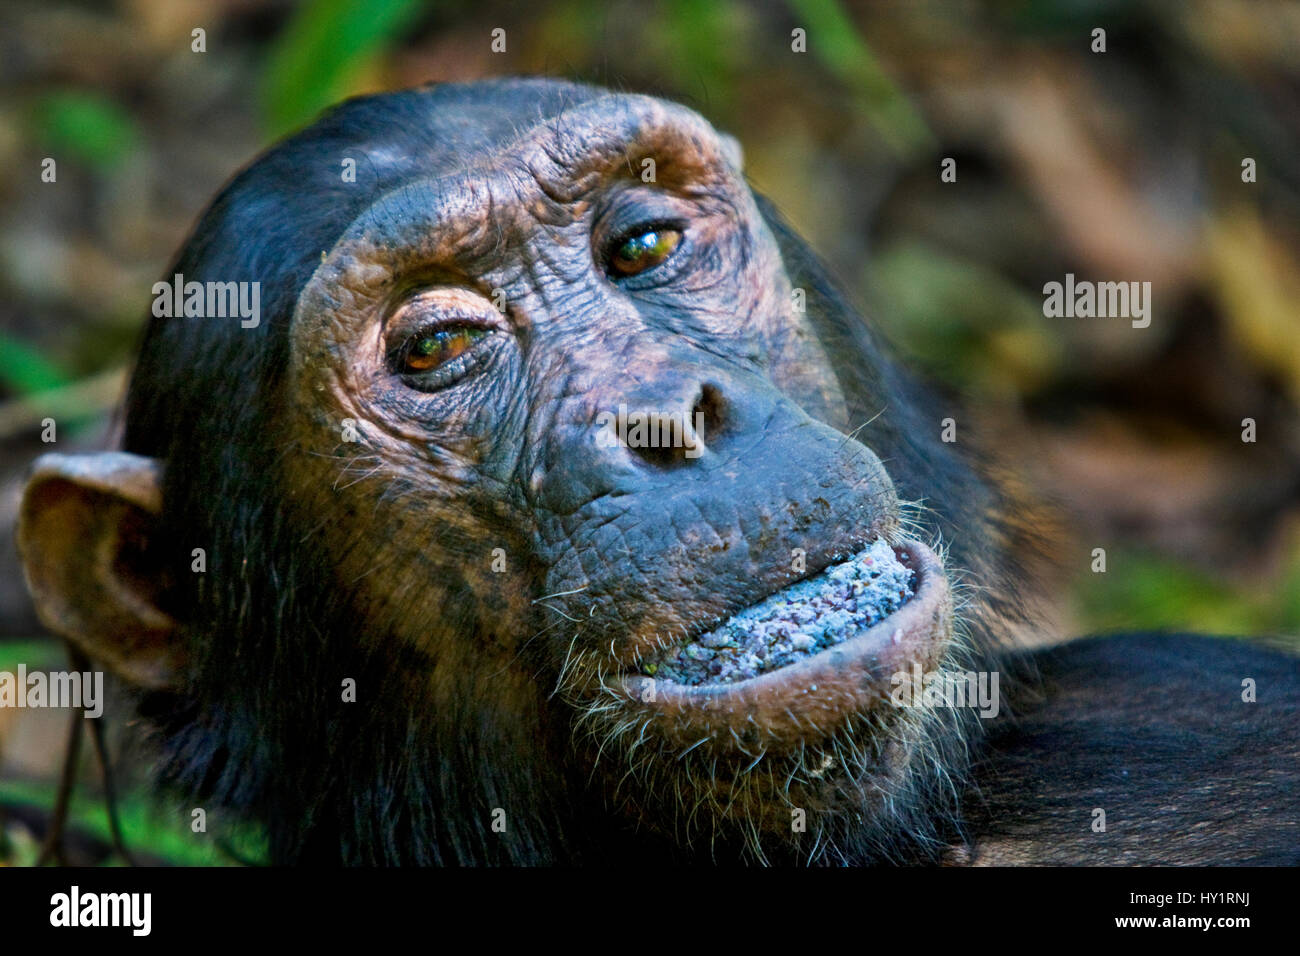 Chimpanzee (Pan troglodytes) with a mouth full of berries, Mahale National Park, Tanzania. Endangered species. Stock Photo